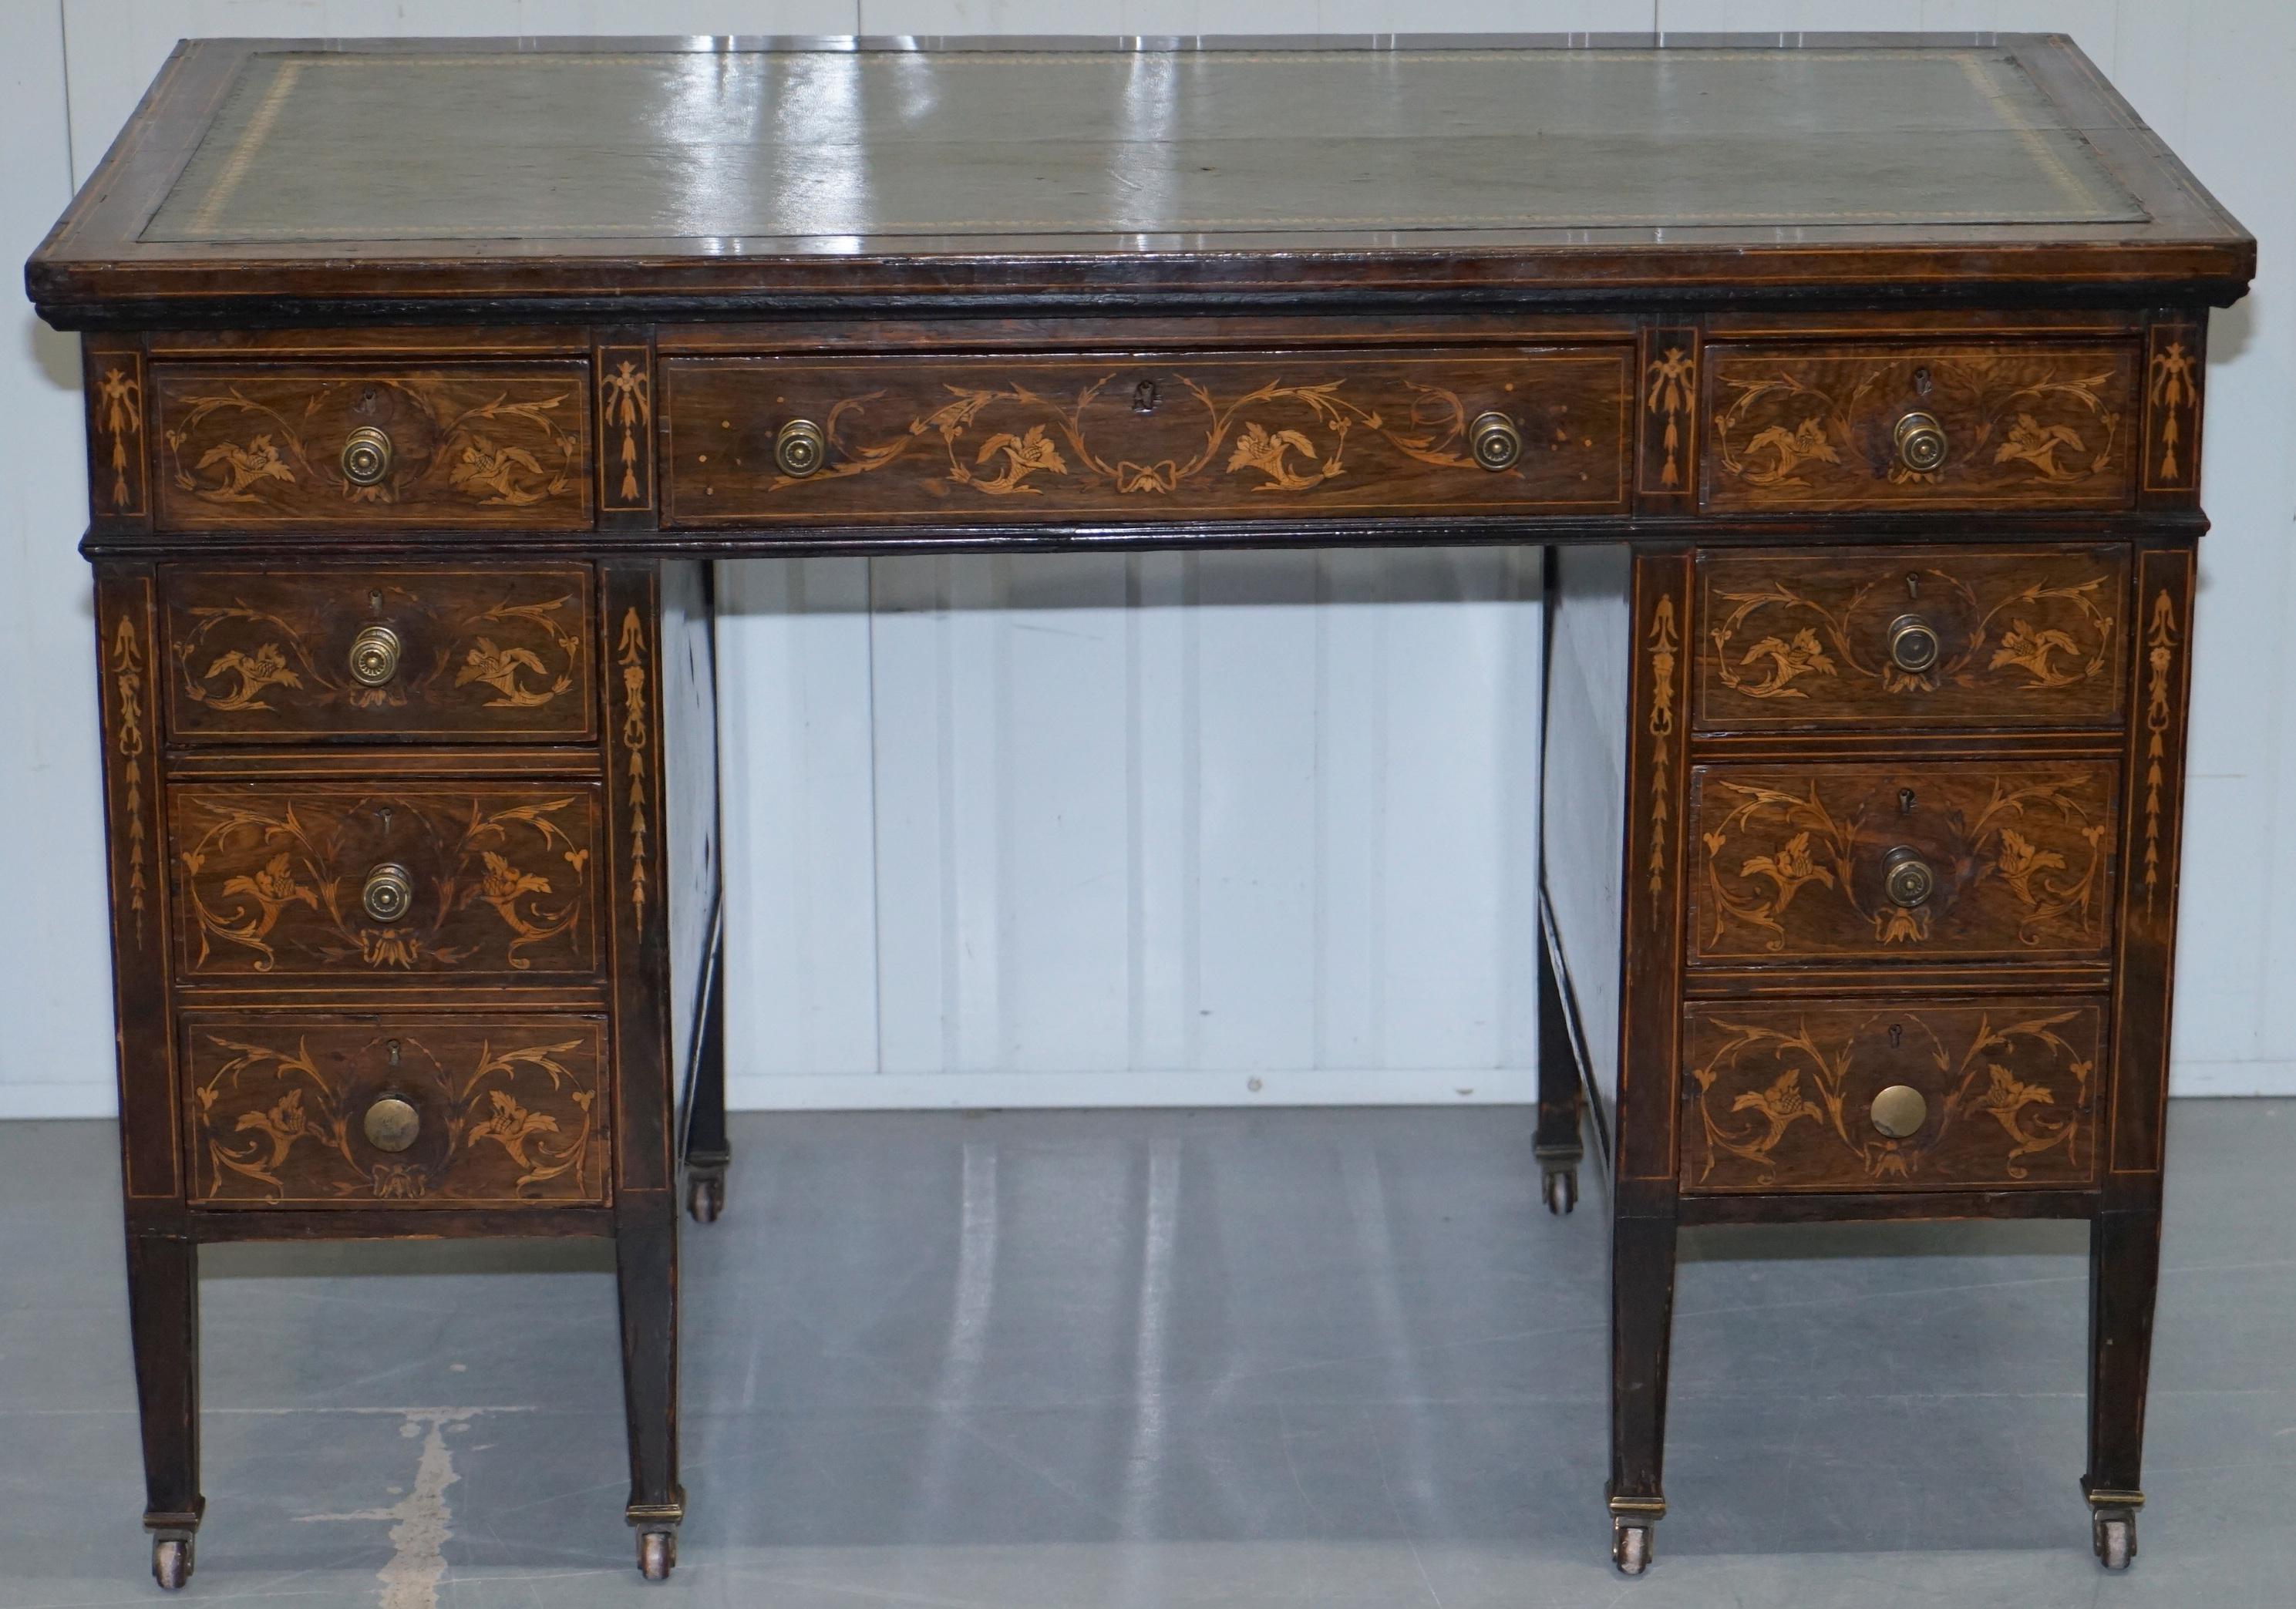 We are delighted to offer for sale this rare original Victorian circa 1860 Hardwood  Marquetry inlaid writing desk

A stunning highly decorative desk, this piece must have taken months to make, the Rosewood patina is glorious, its rare to find this